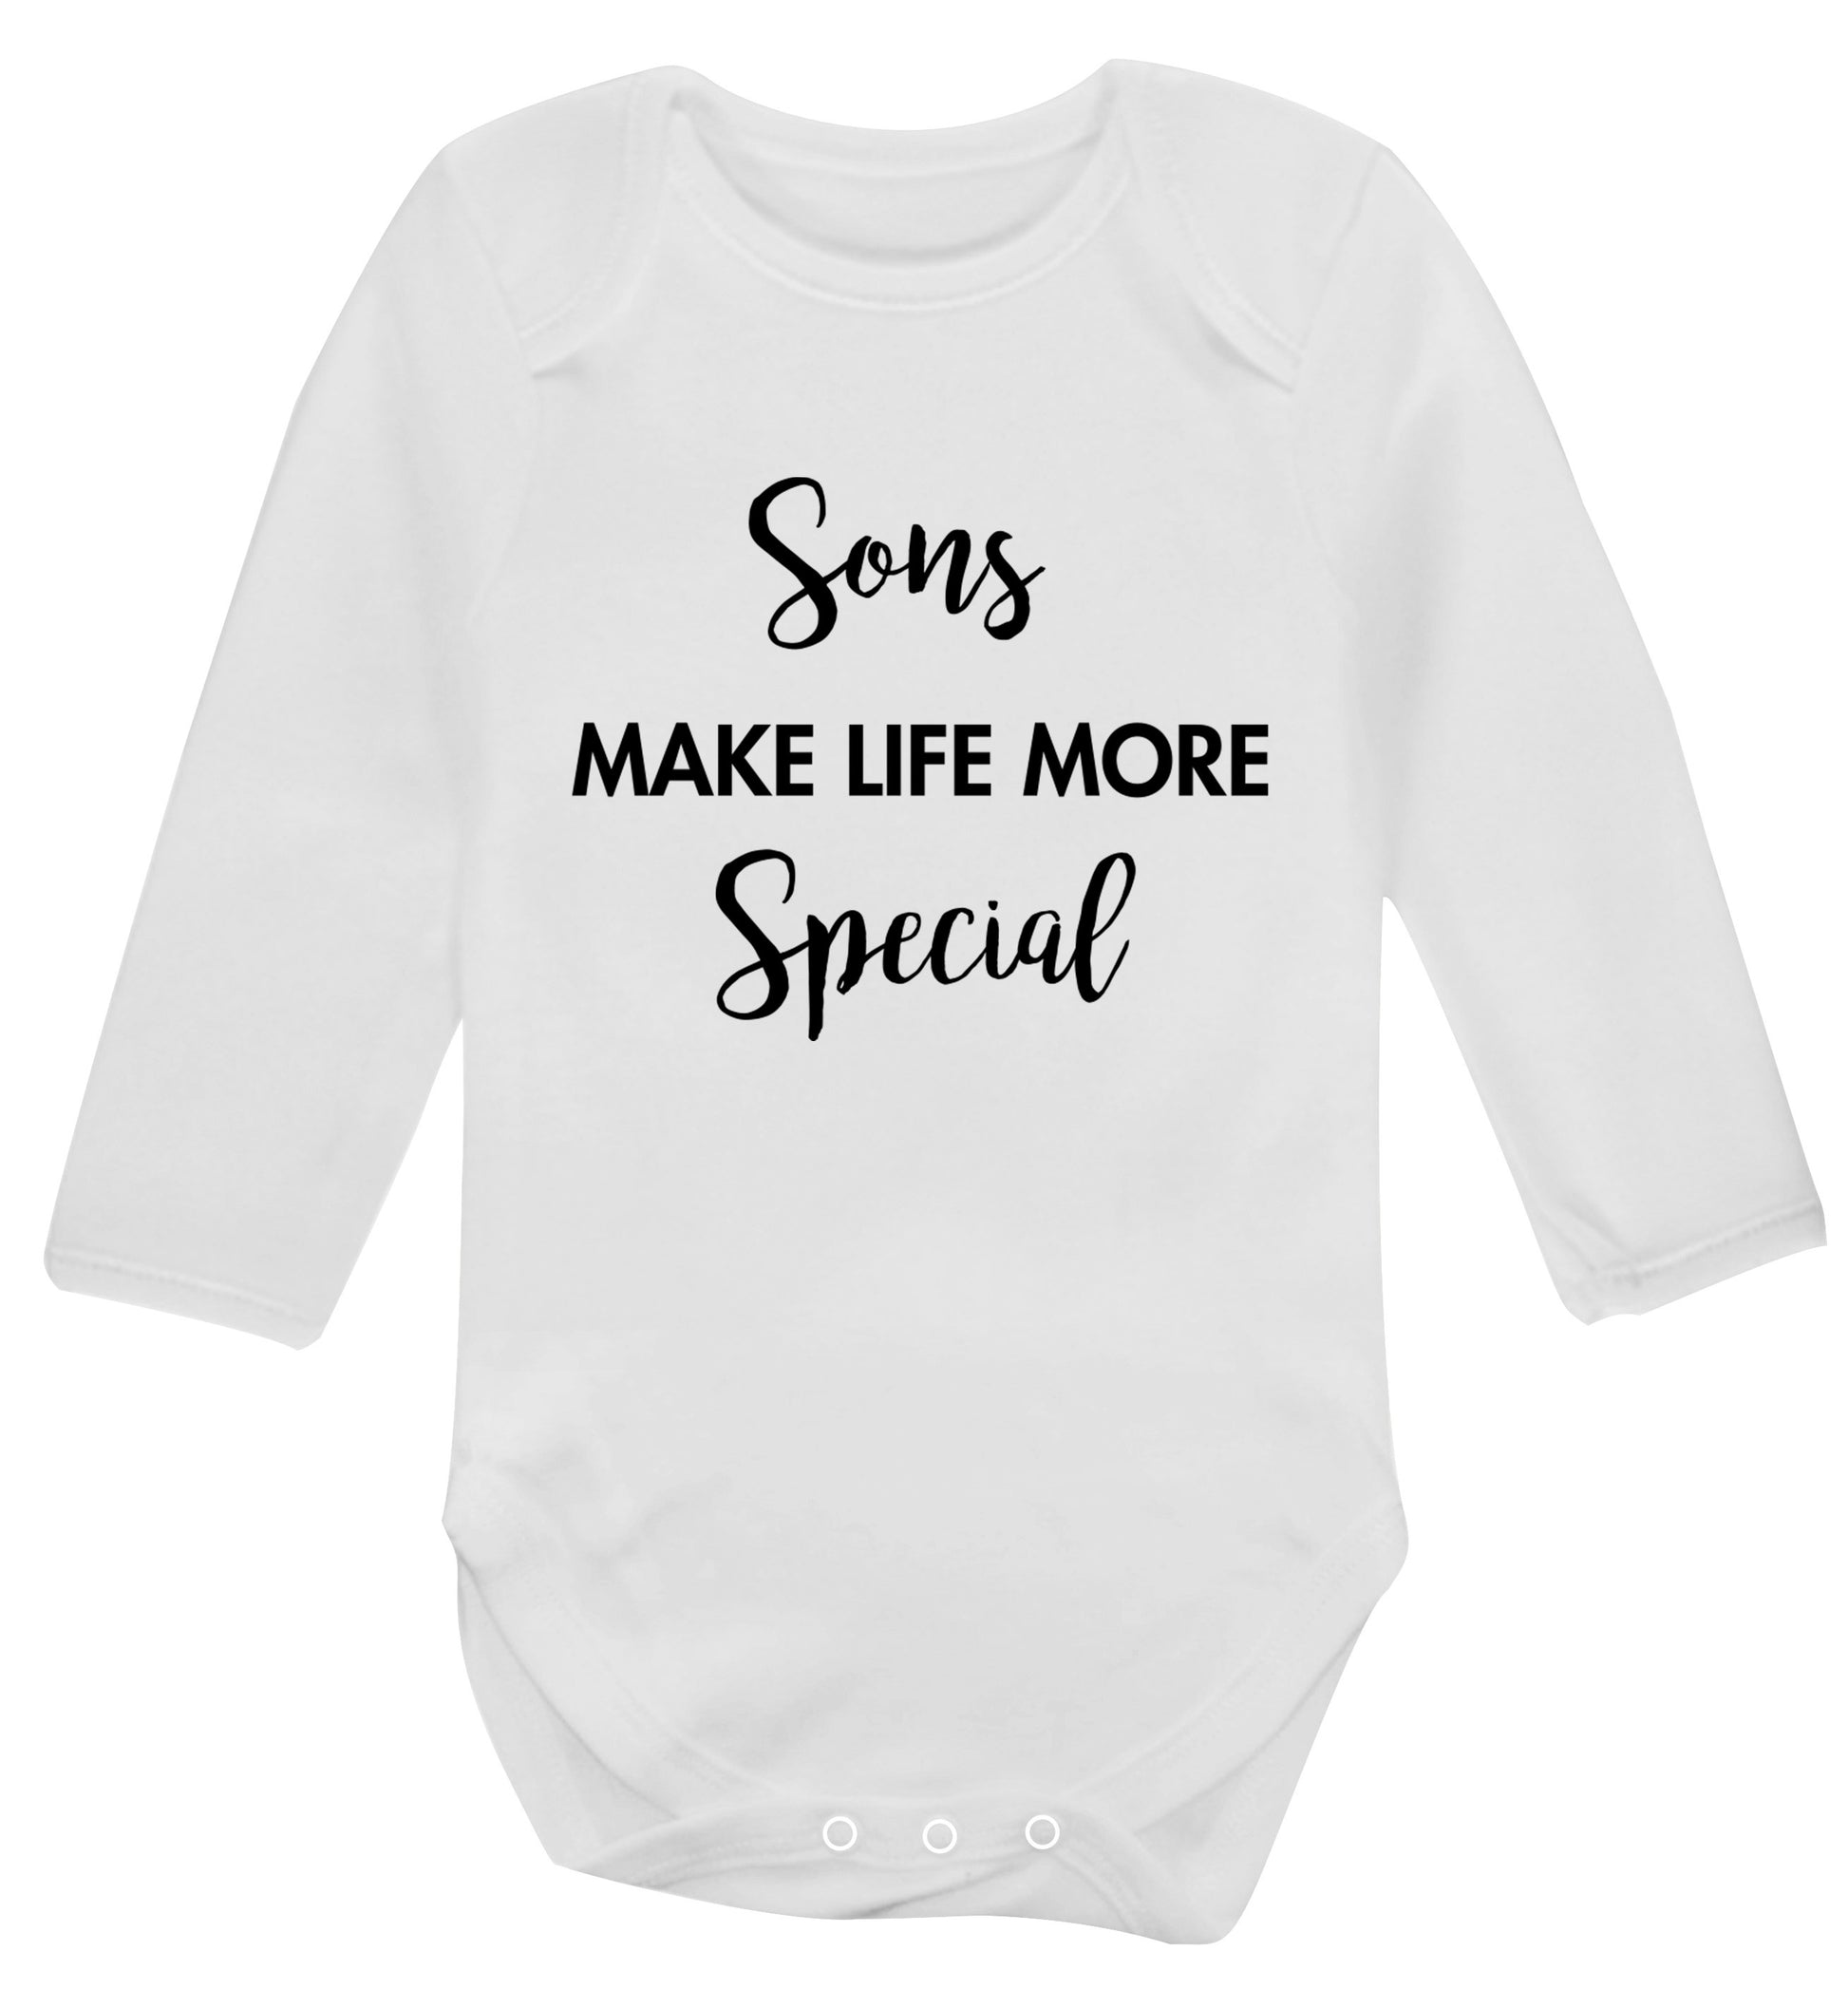 Sons make life more special Baby Vest long sleeved white 6-12 months